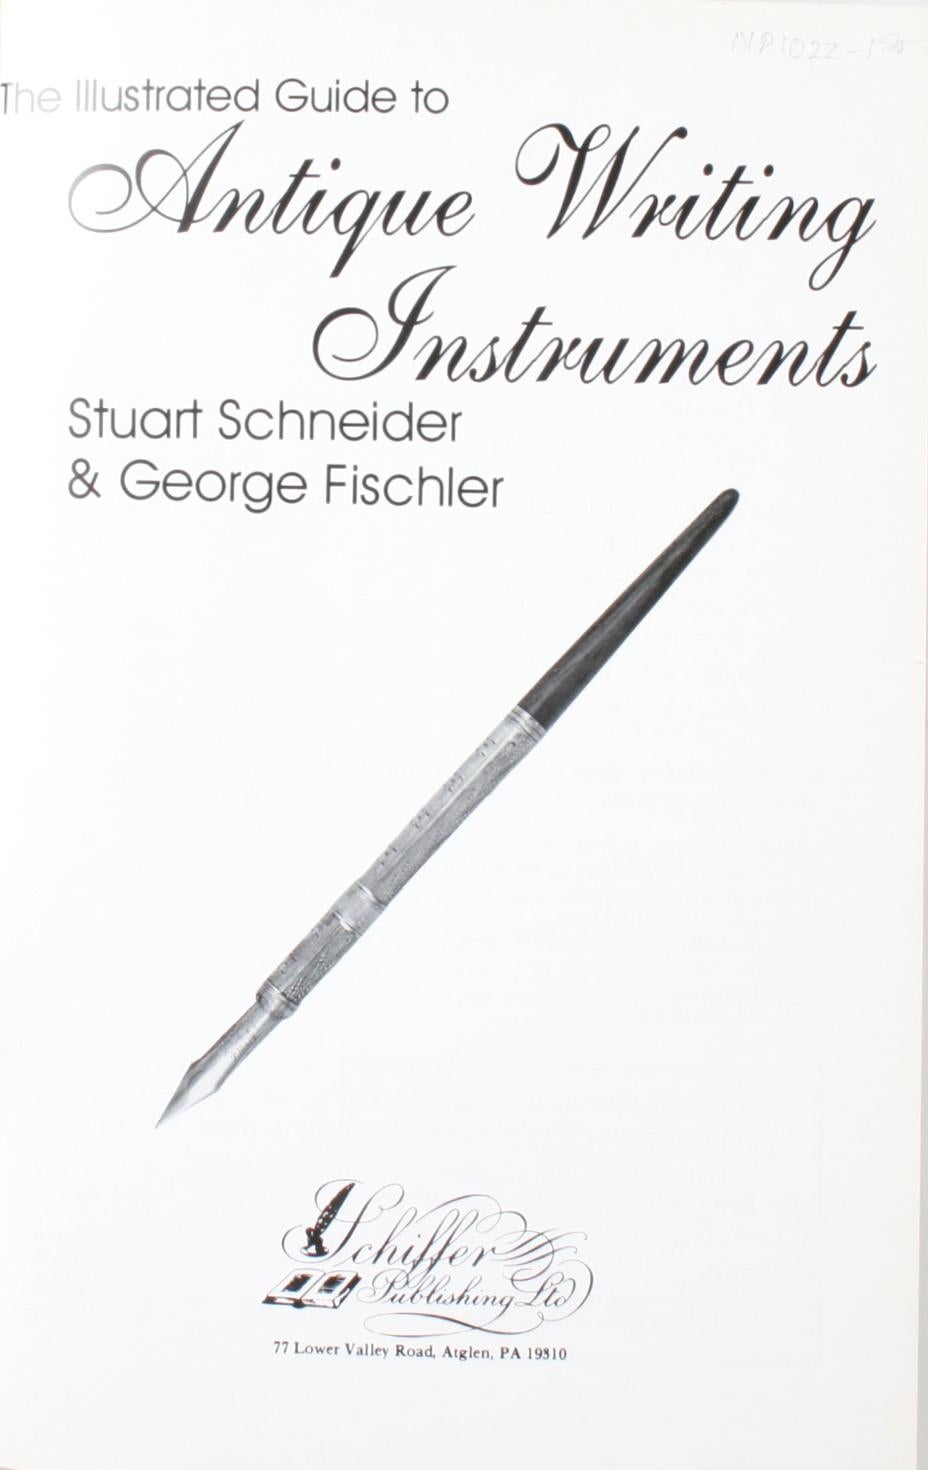 The Illustrated Guide to Antique Writing Instruments by Stuart & George Fischler. 1st Edition softcover. 160 pages. This book has become the standard pocket guide. Just what collectors need for quick and easy reference and its newly updated prices